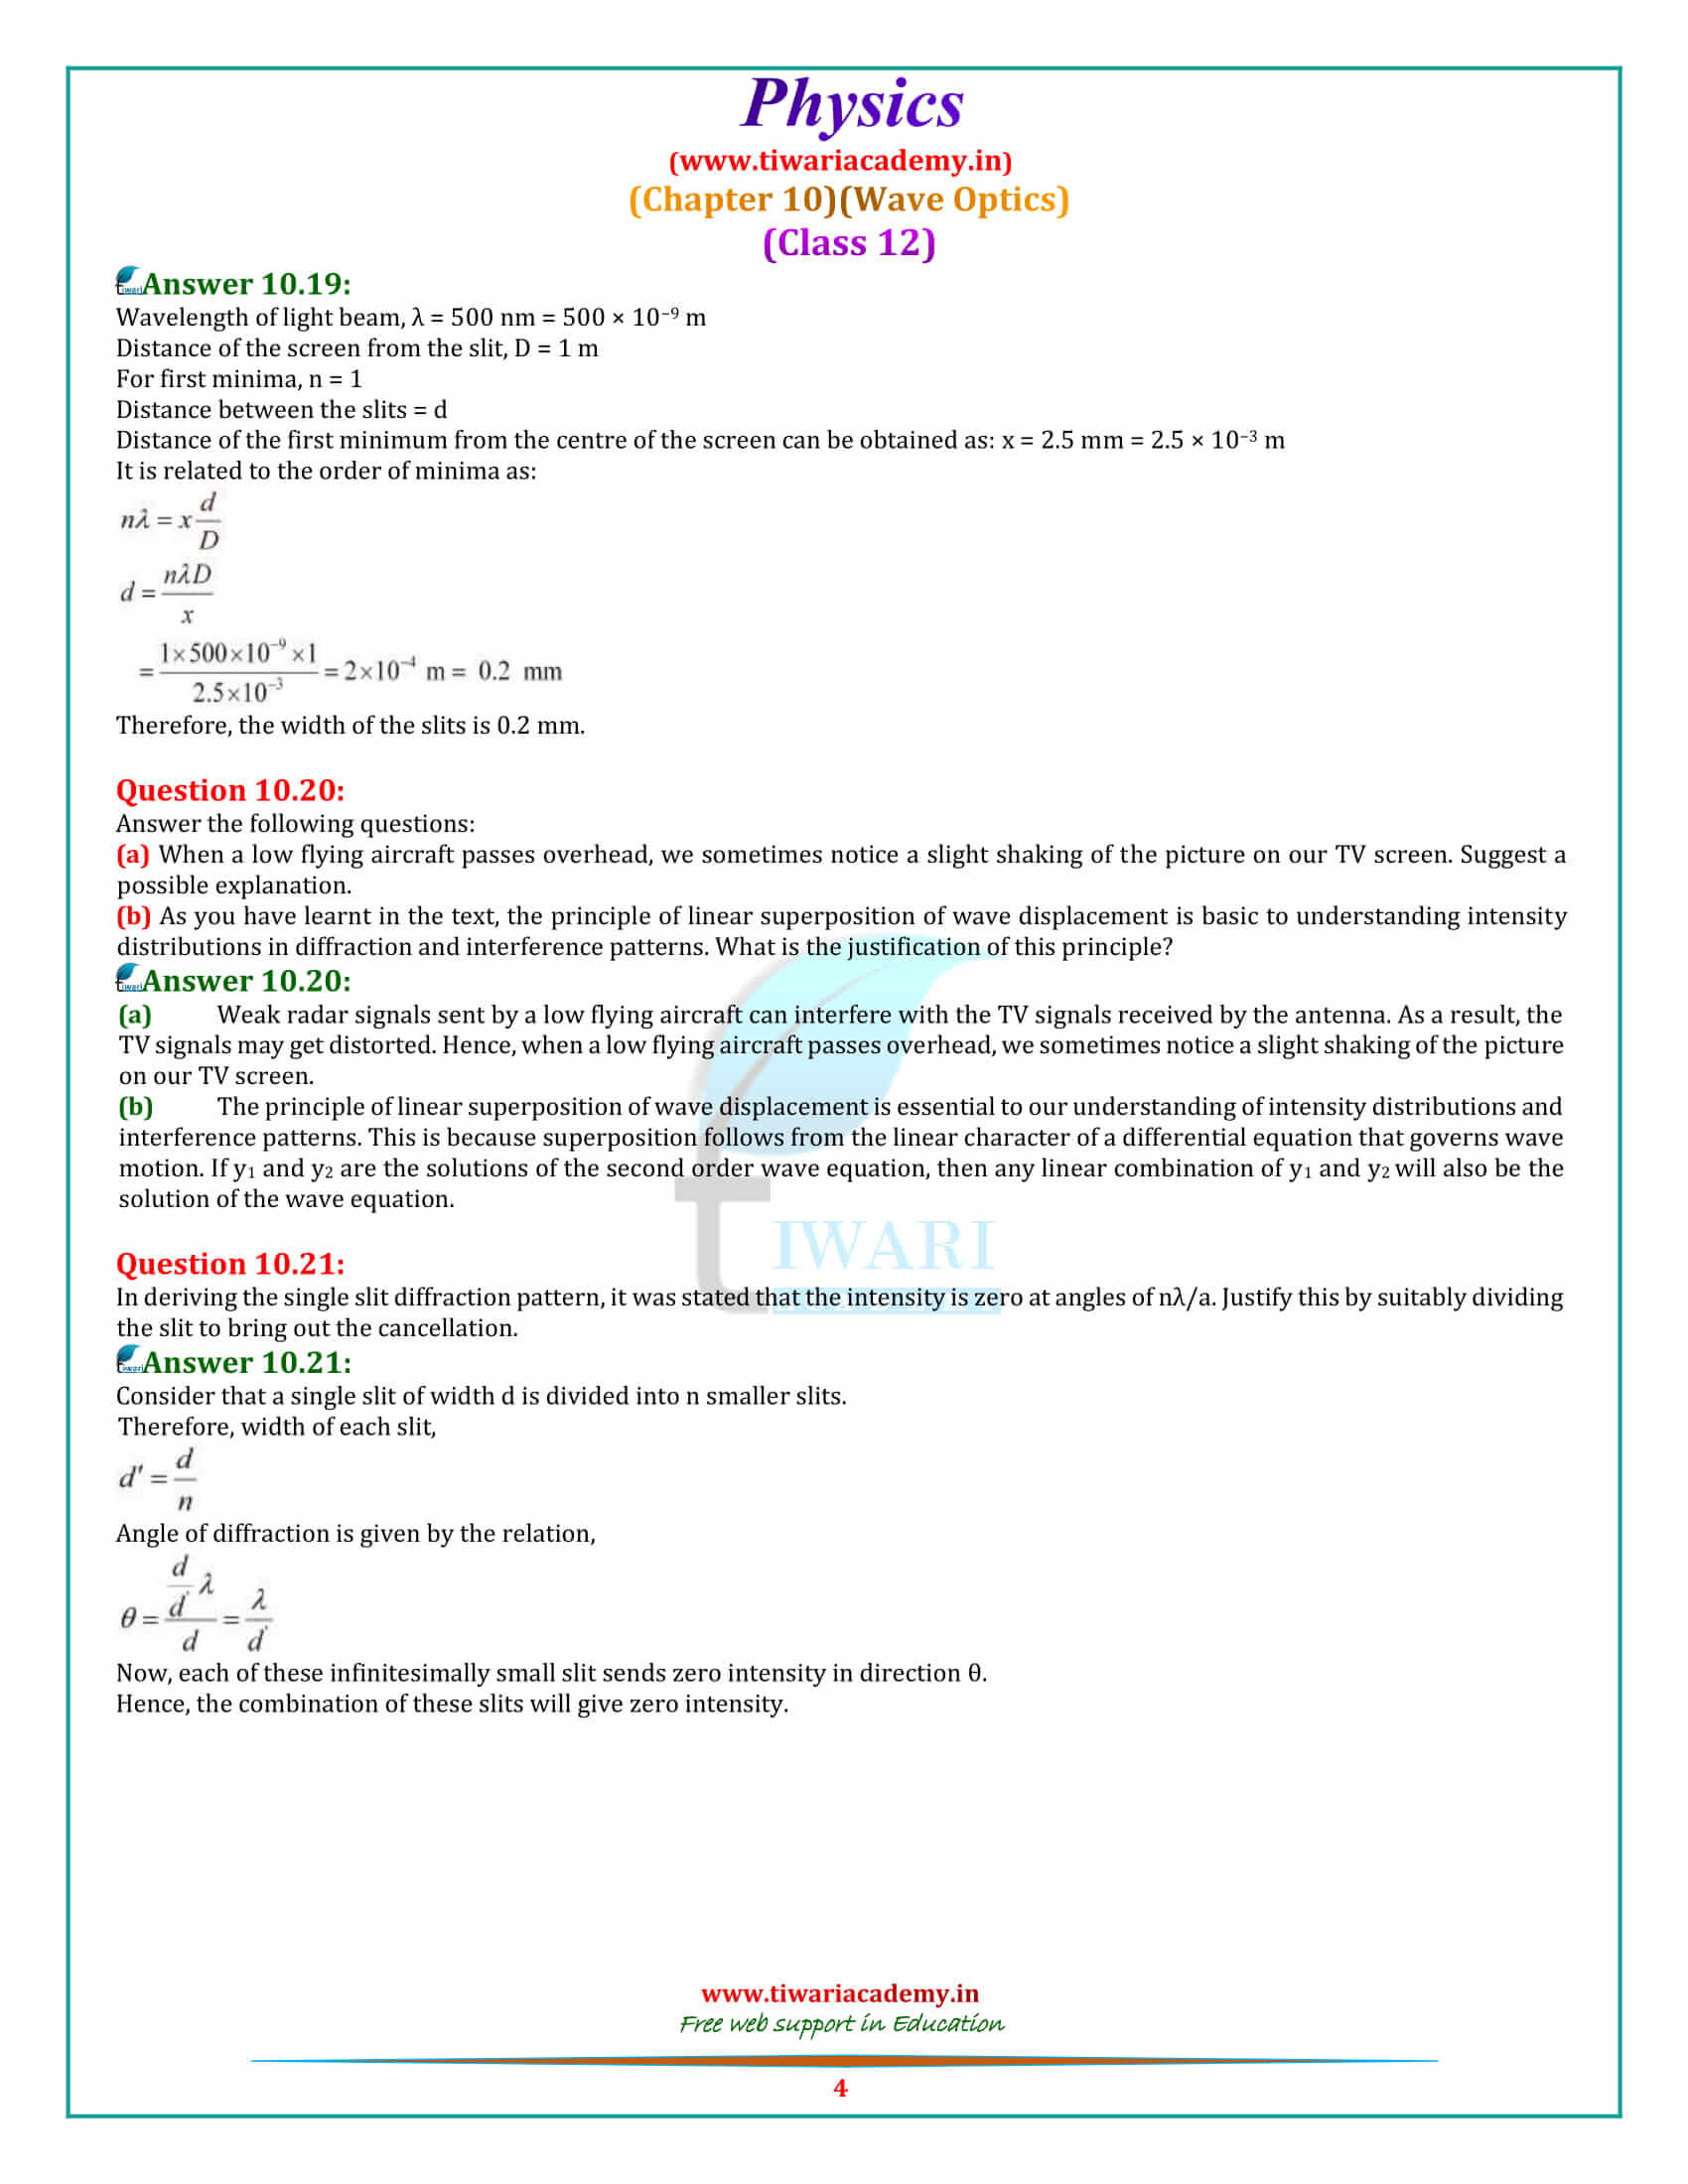 12 Physics Chapter 10 Wave Optics all questions answers free up and mp cbse board